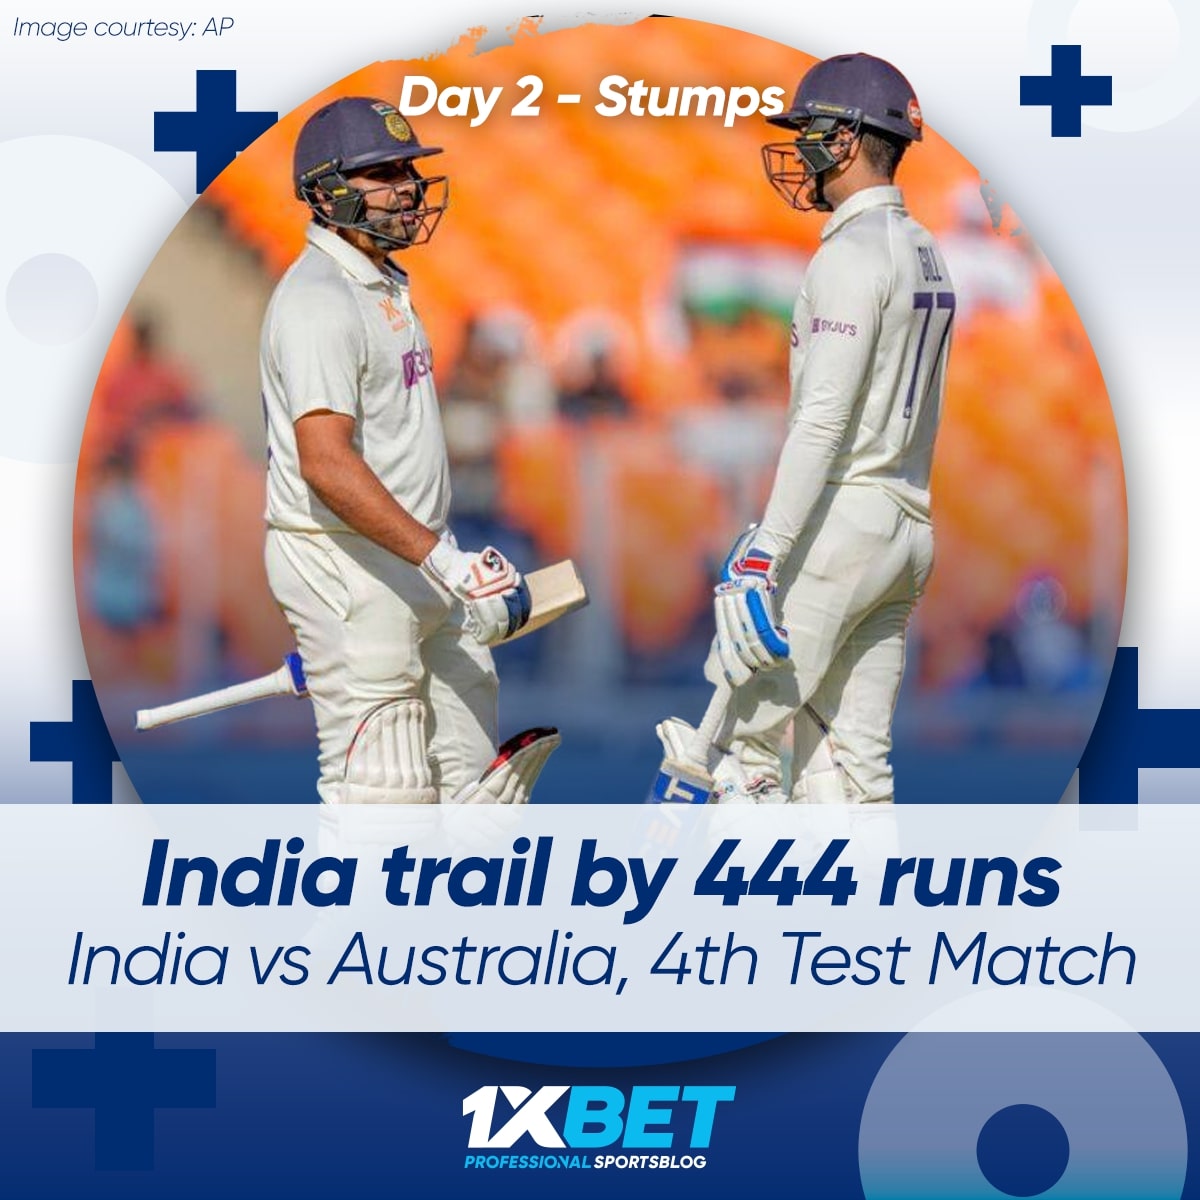 Day 2 - Stumps, India trail by 444 runs